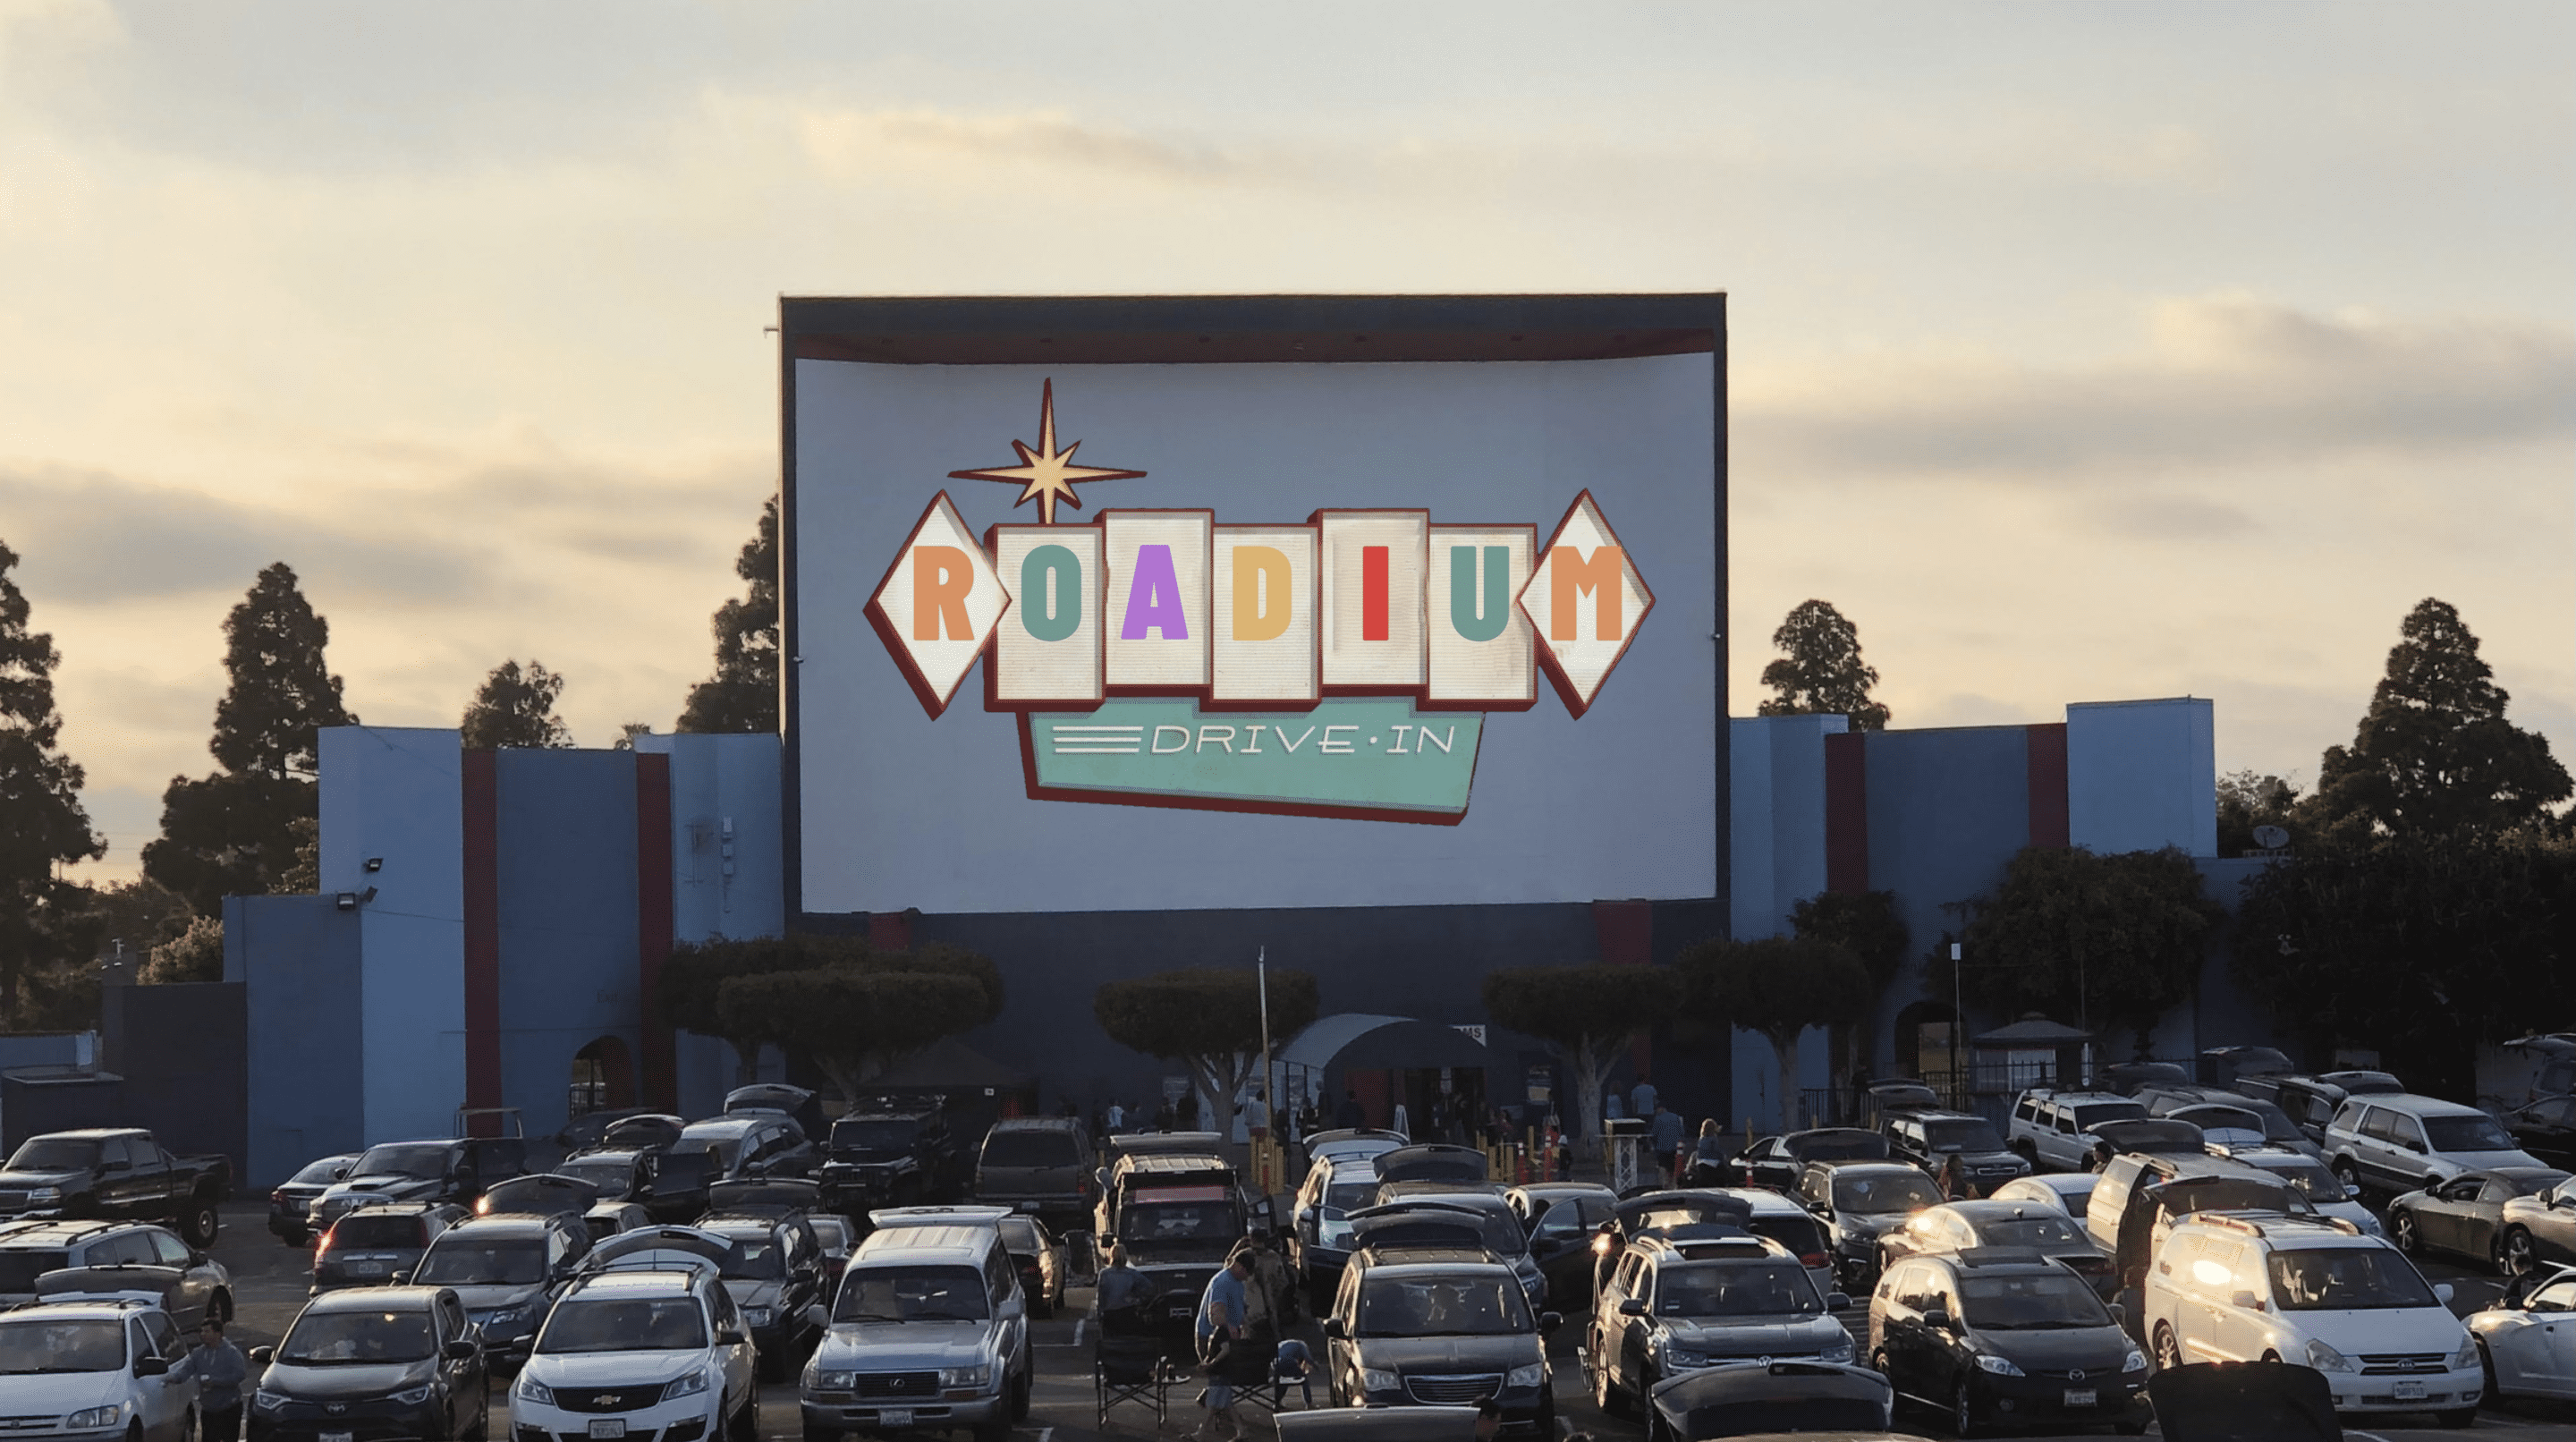 Drive-in movies are back this summer!